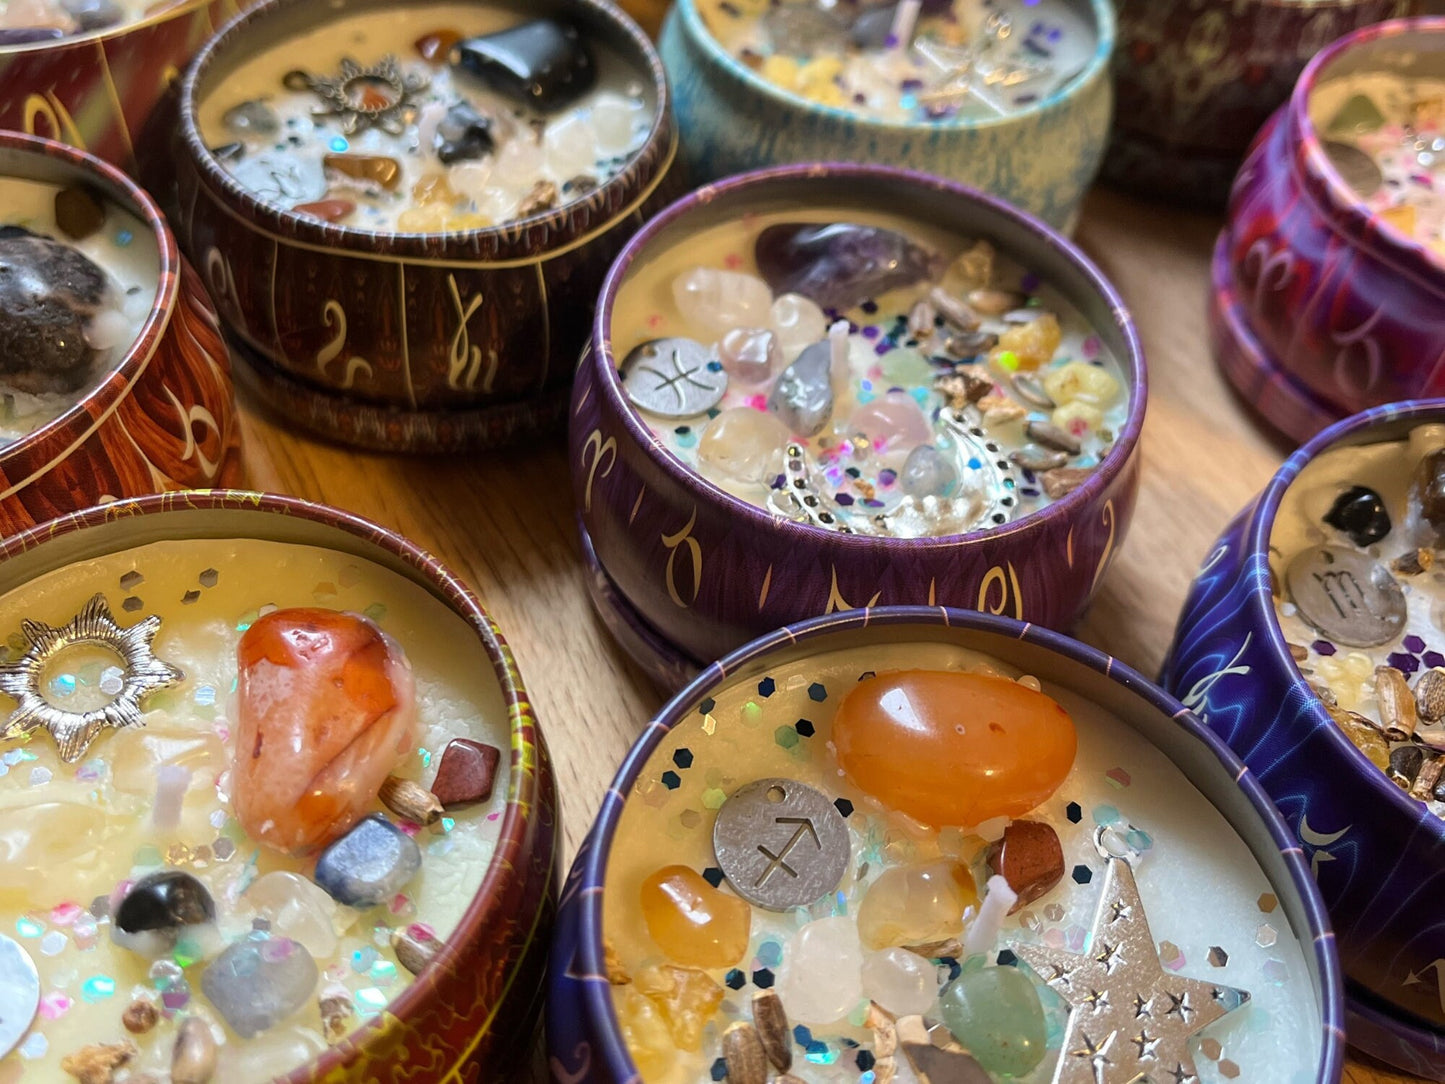 Zodiac Charm Crystal & Herb Infused Tin Candles